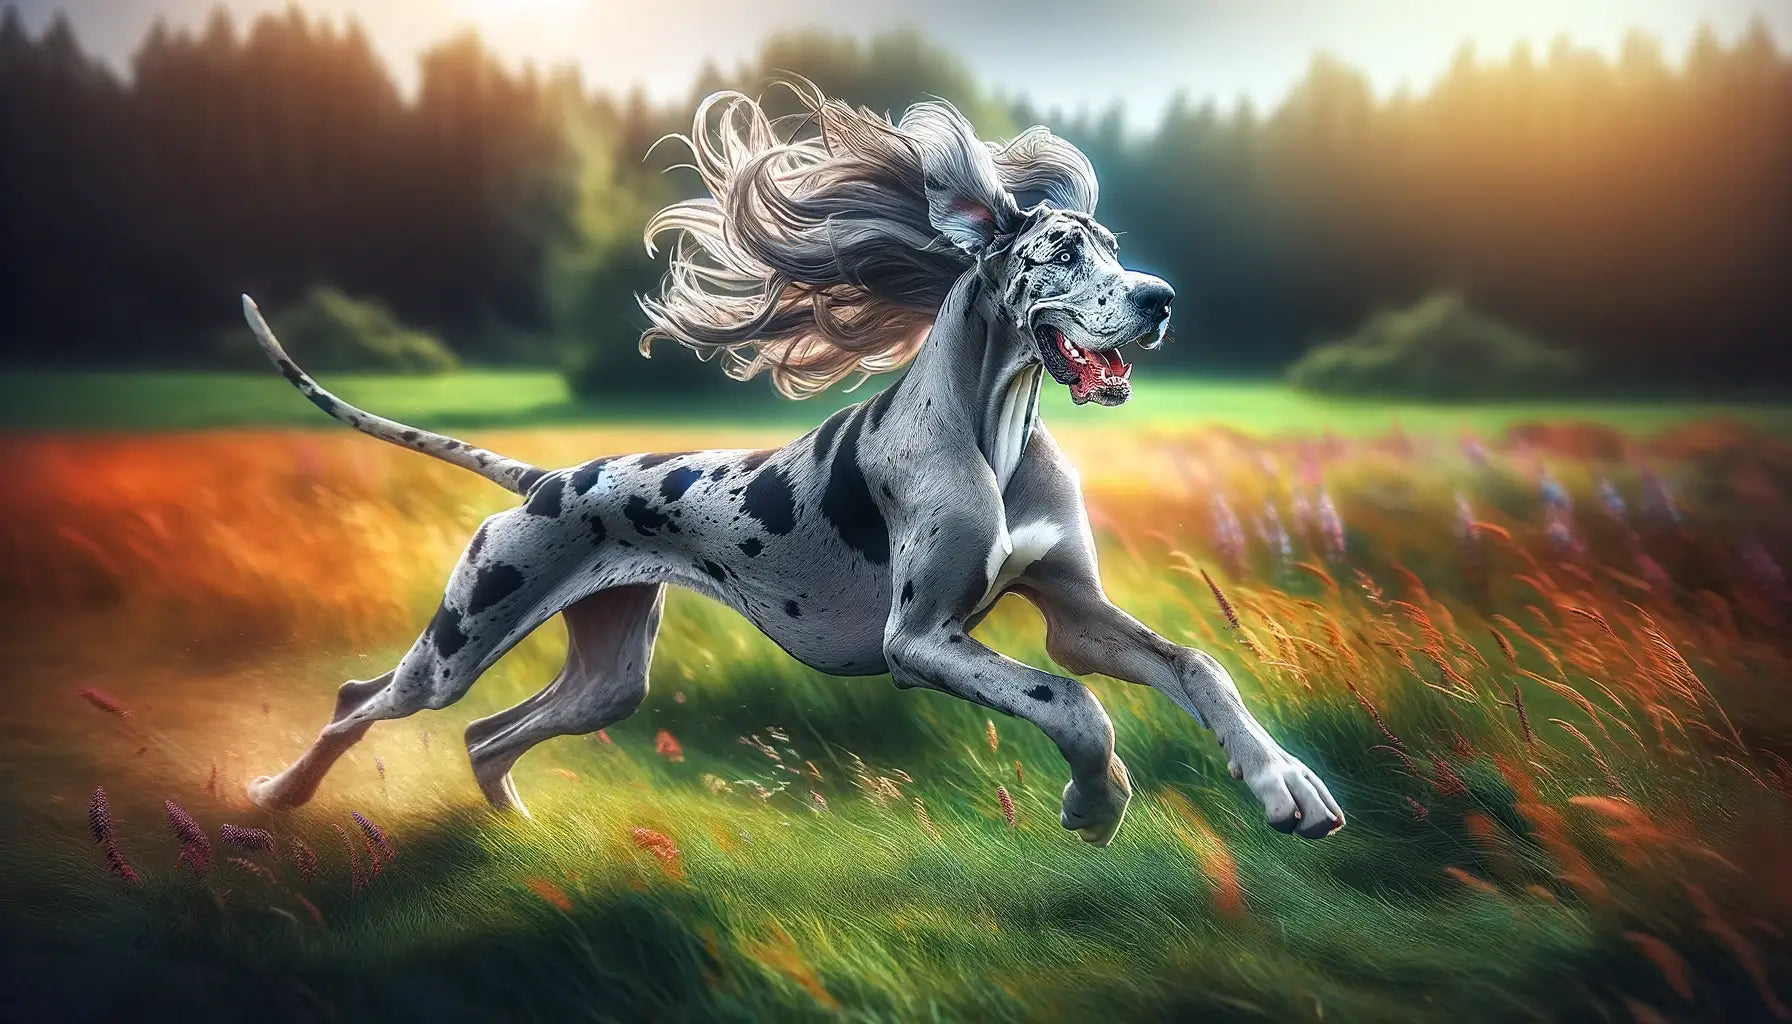 A Merle Great Dane in mid-stride across a field, its joyful demeanor and flowing coat highlighting the breed's energy and playfulness.